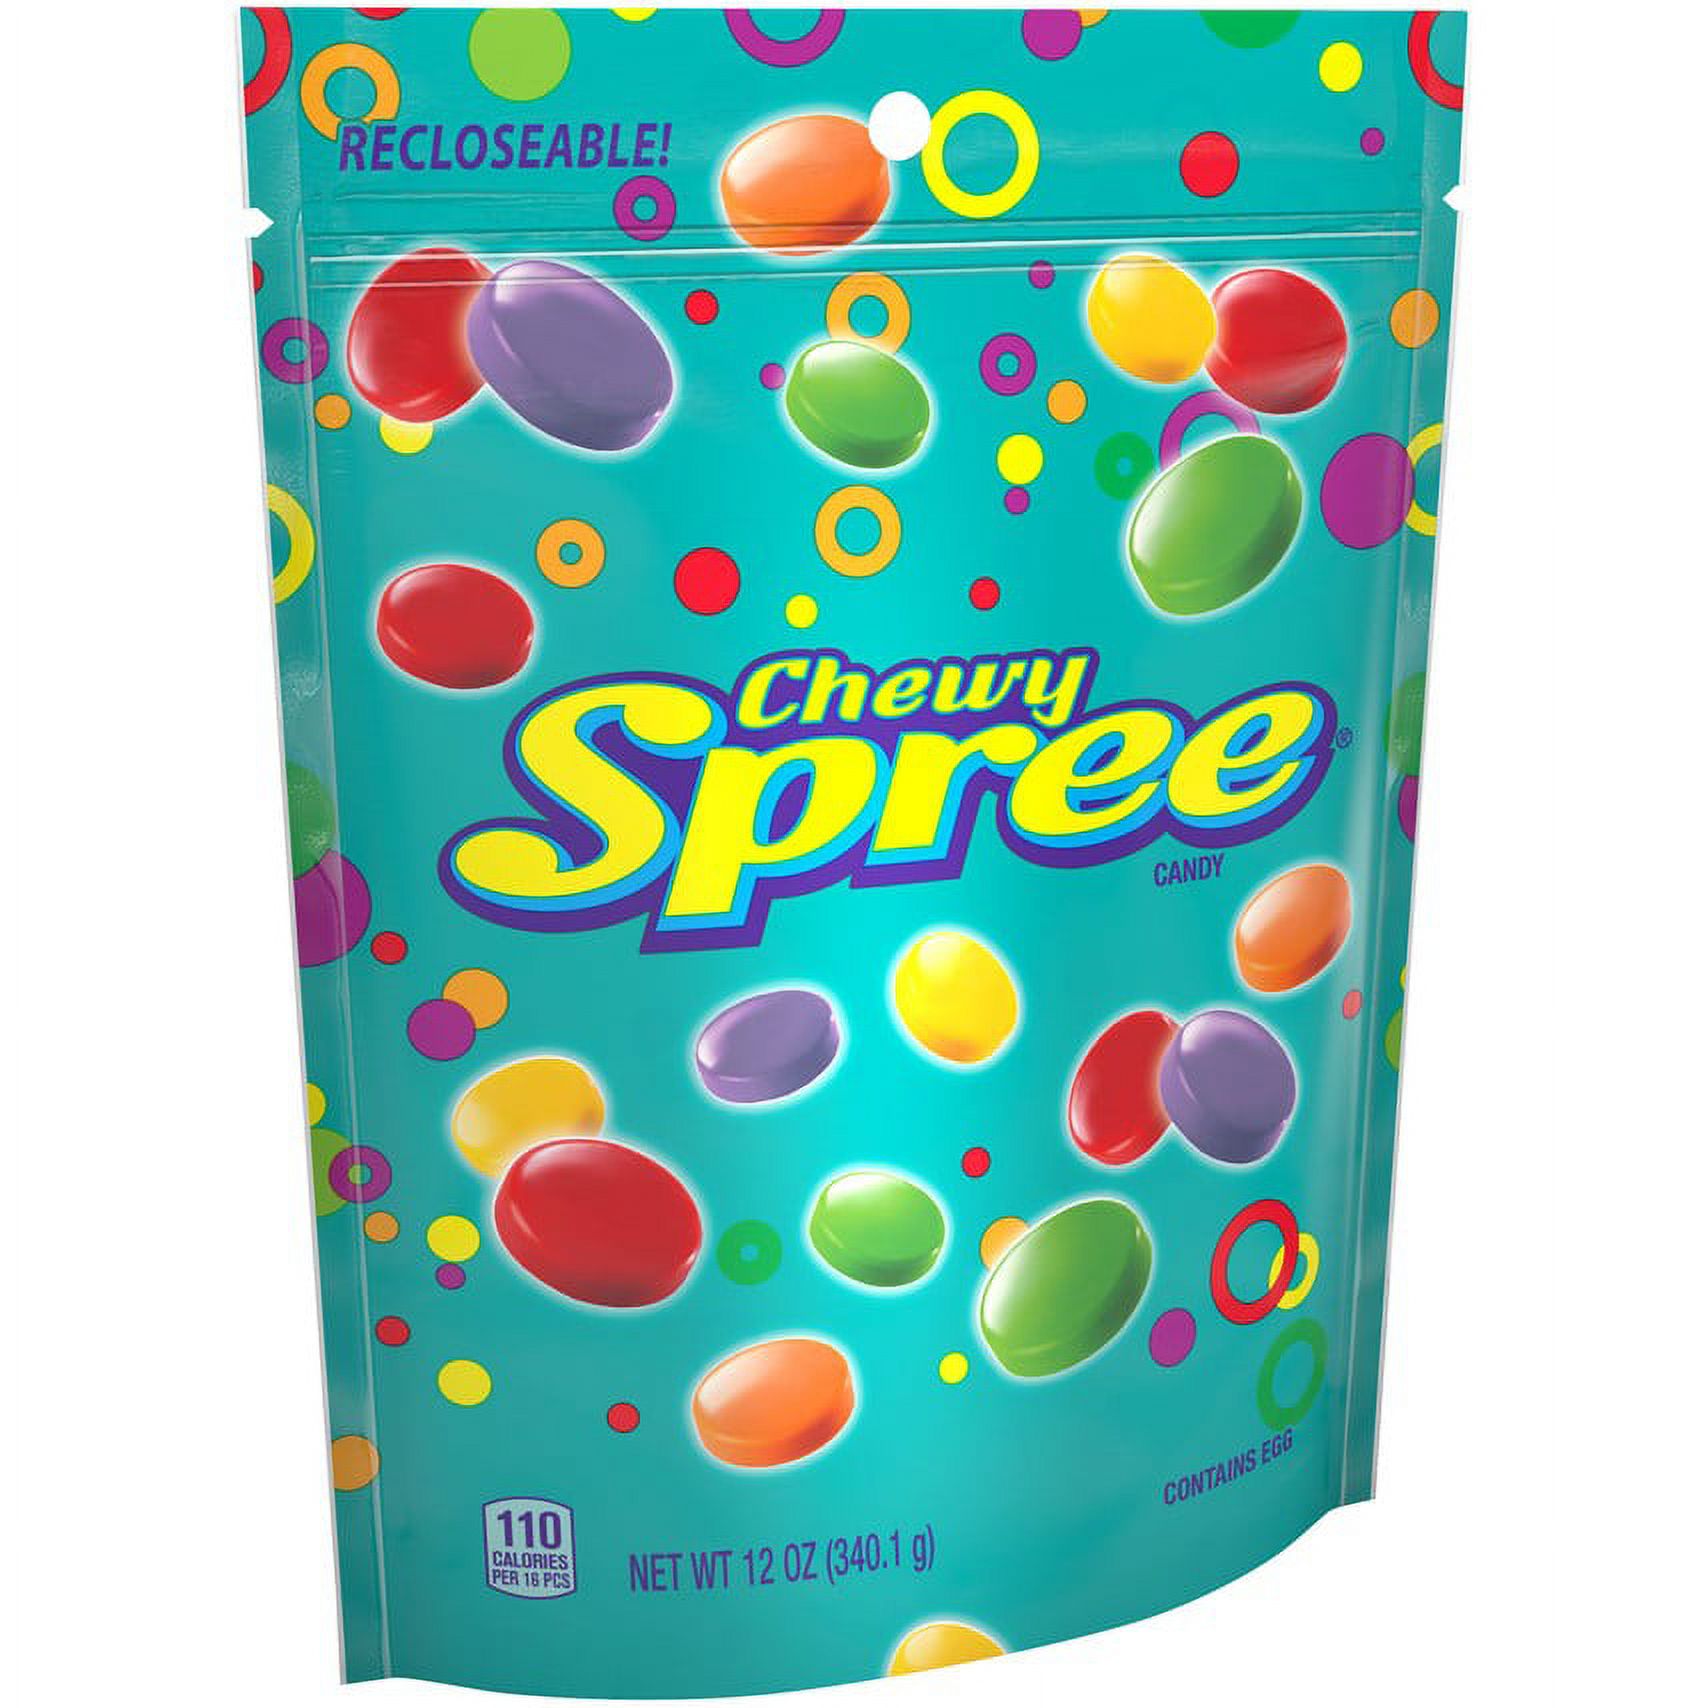 Spree Chewy Candy Bag, 12 oz - image 4 of 7